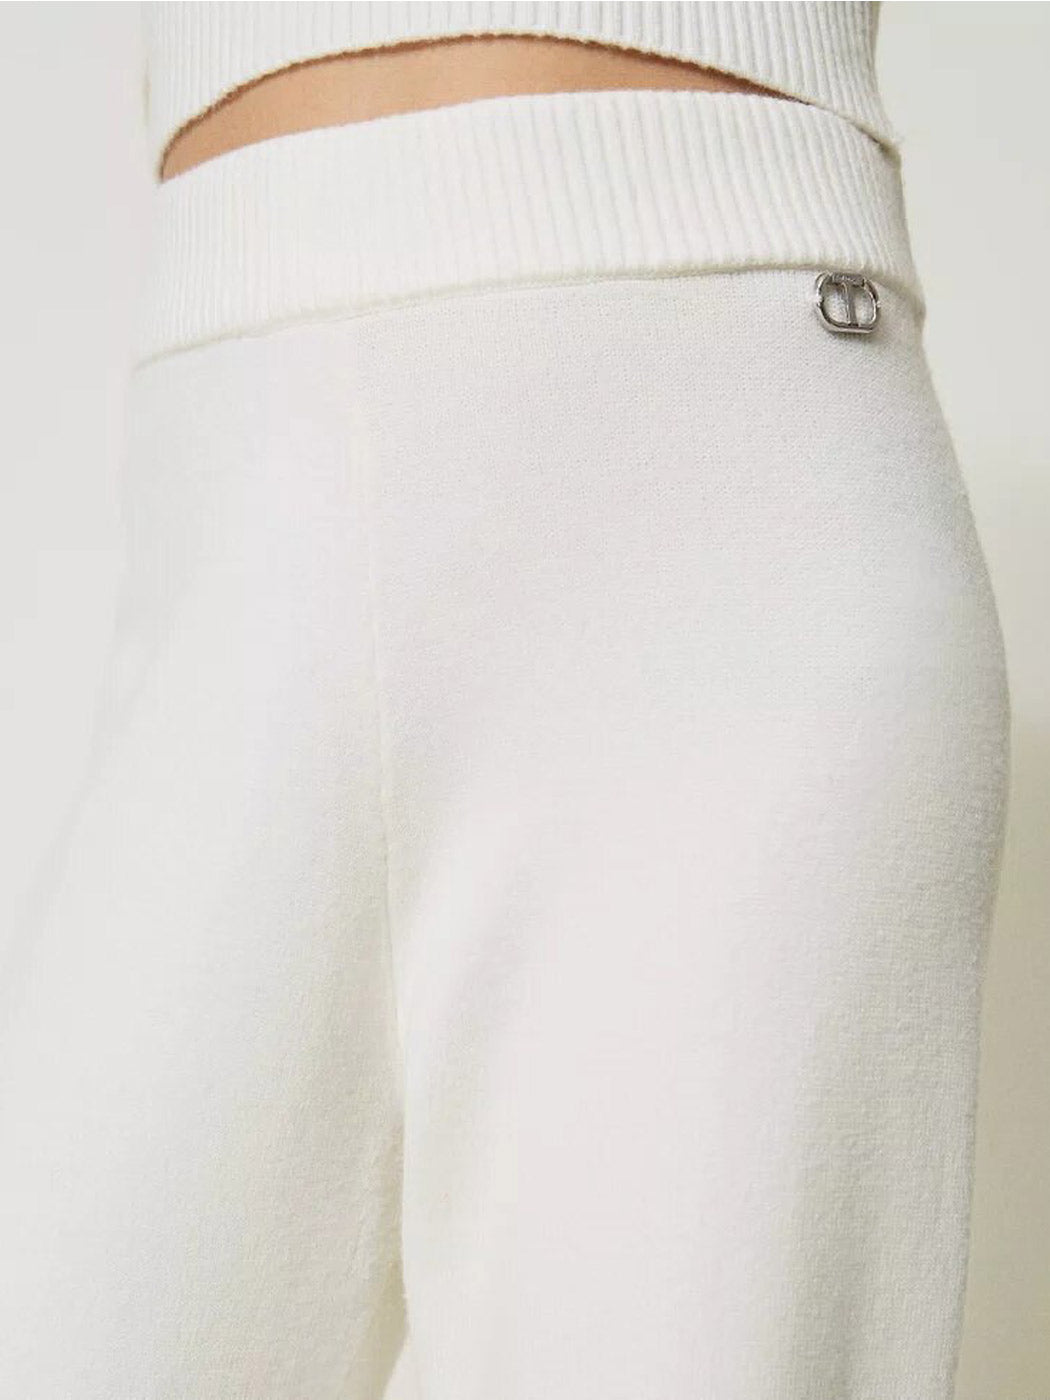 TWINSET Girl's knitted track pants with logo - 232GJ3741 White